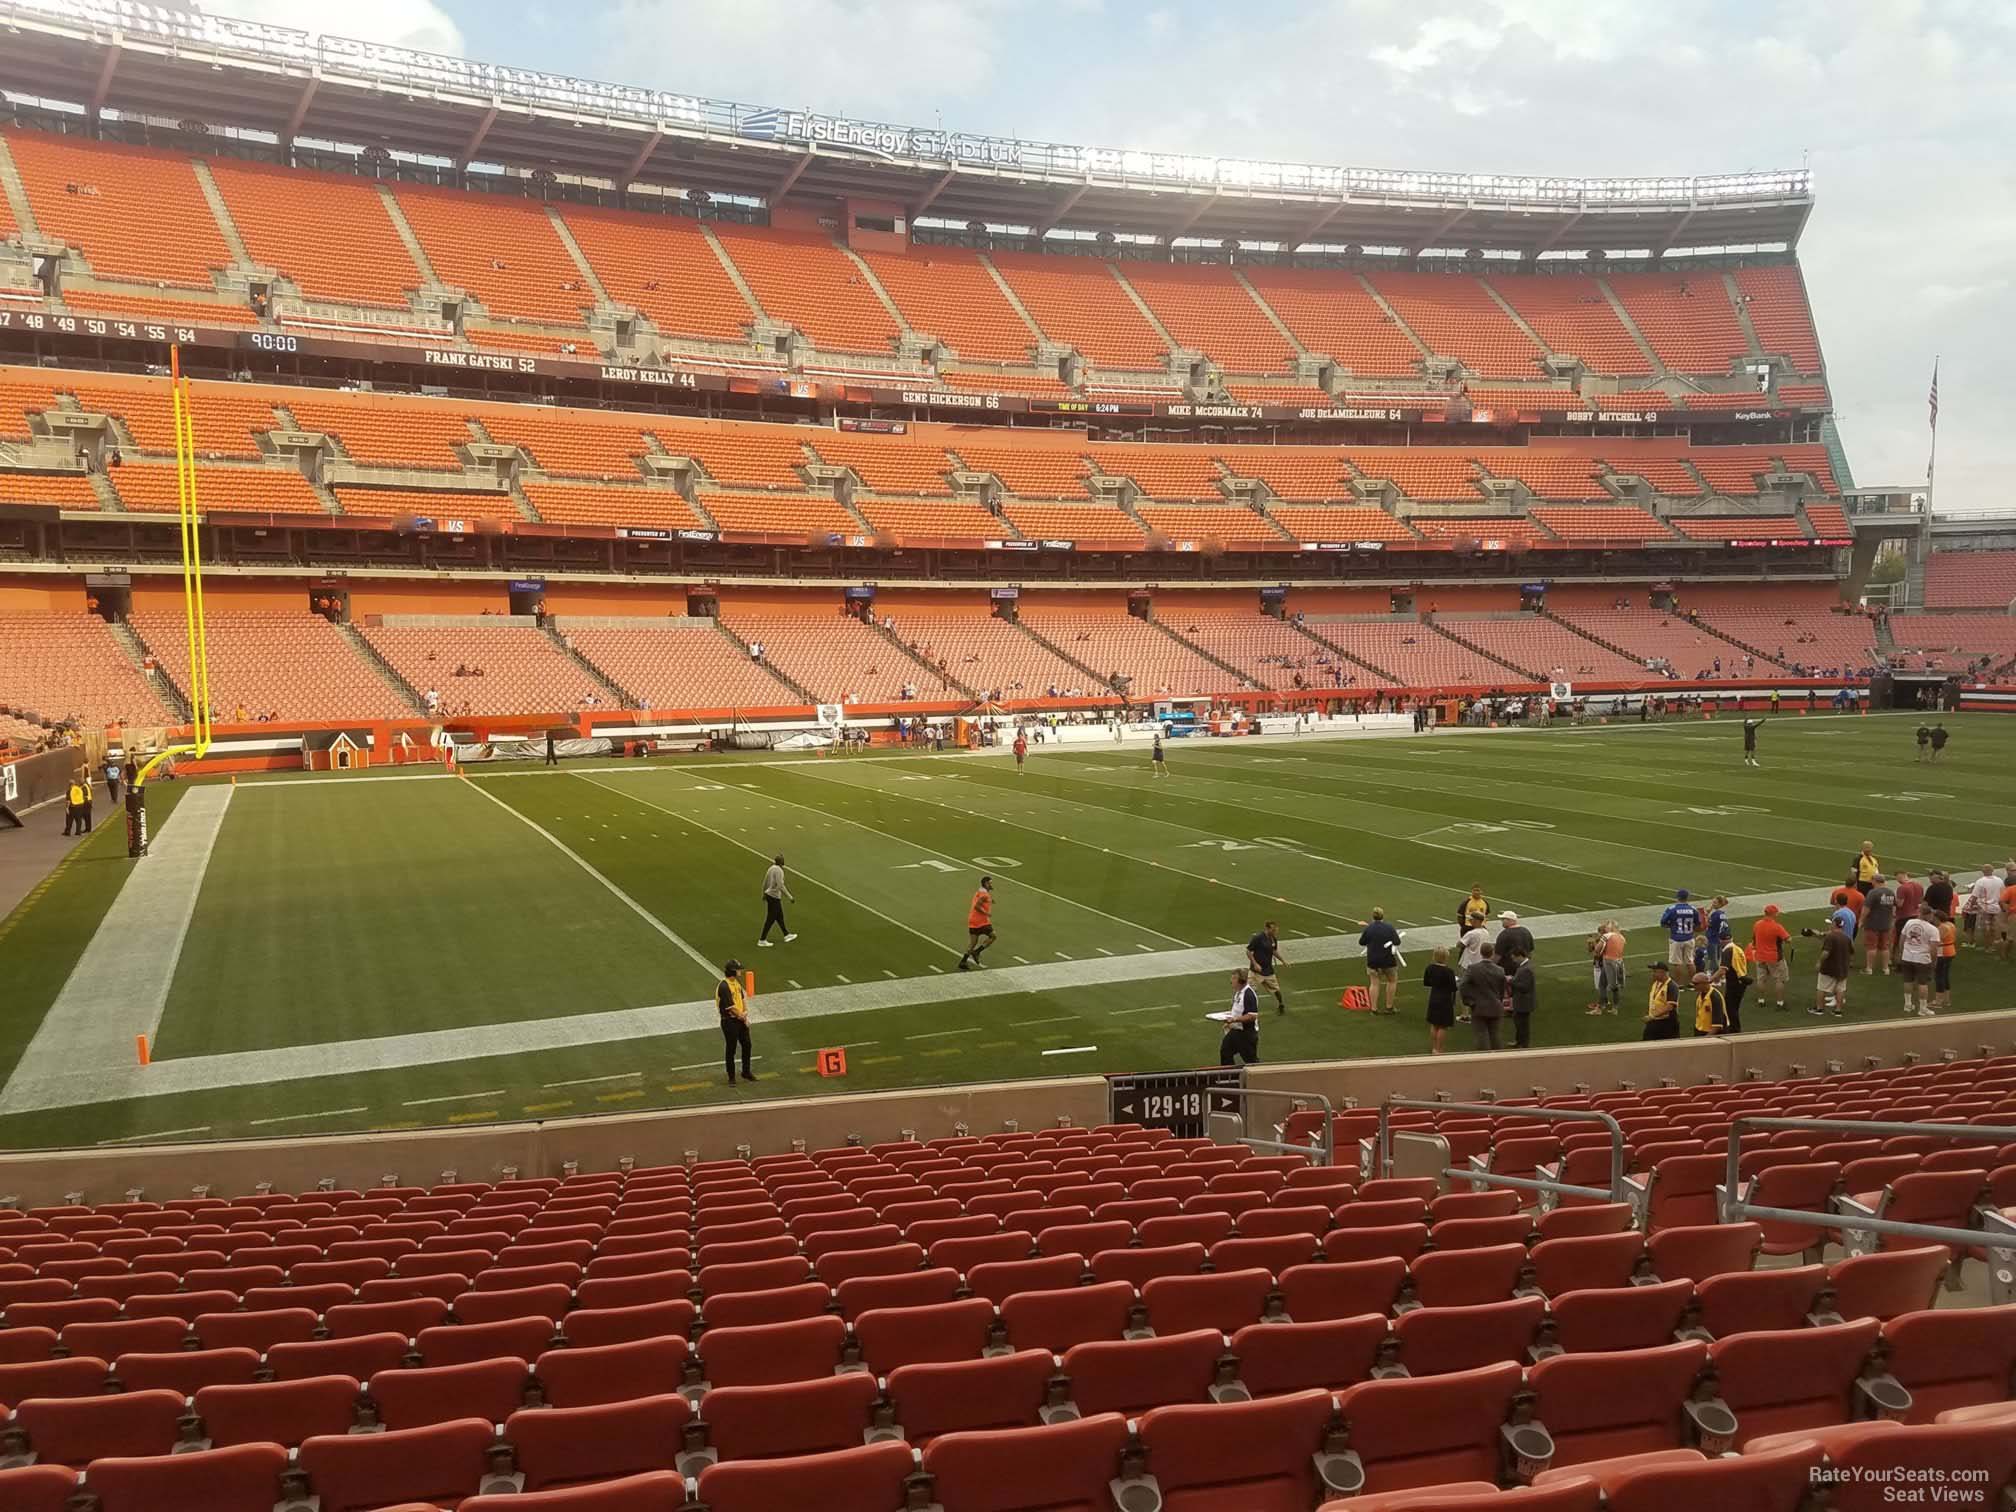 section 129, row 17 seat view  - cleveland browns stadium